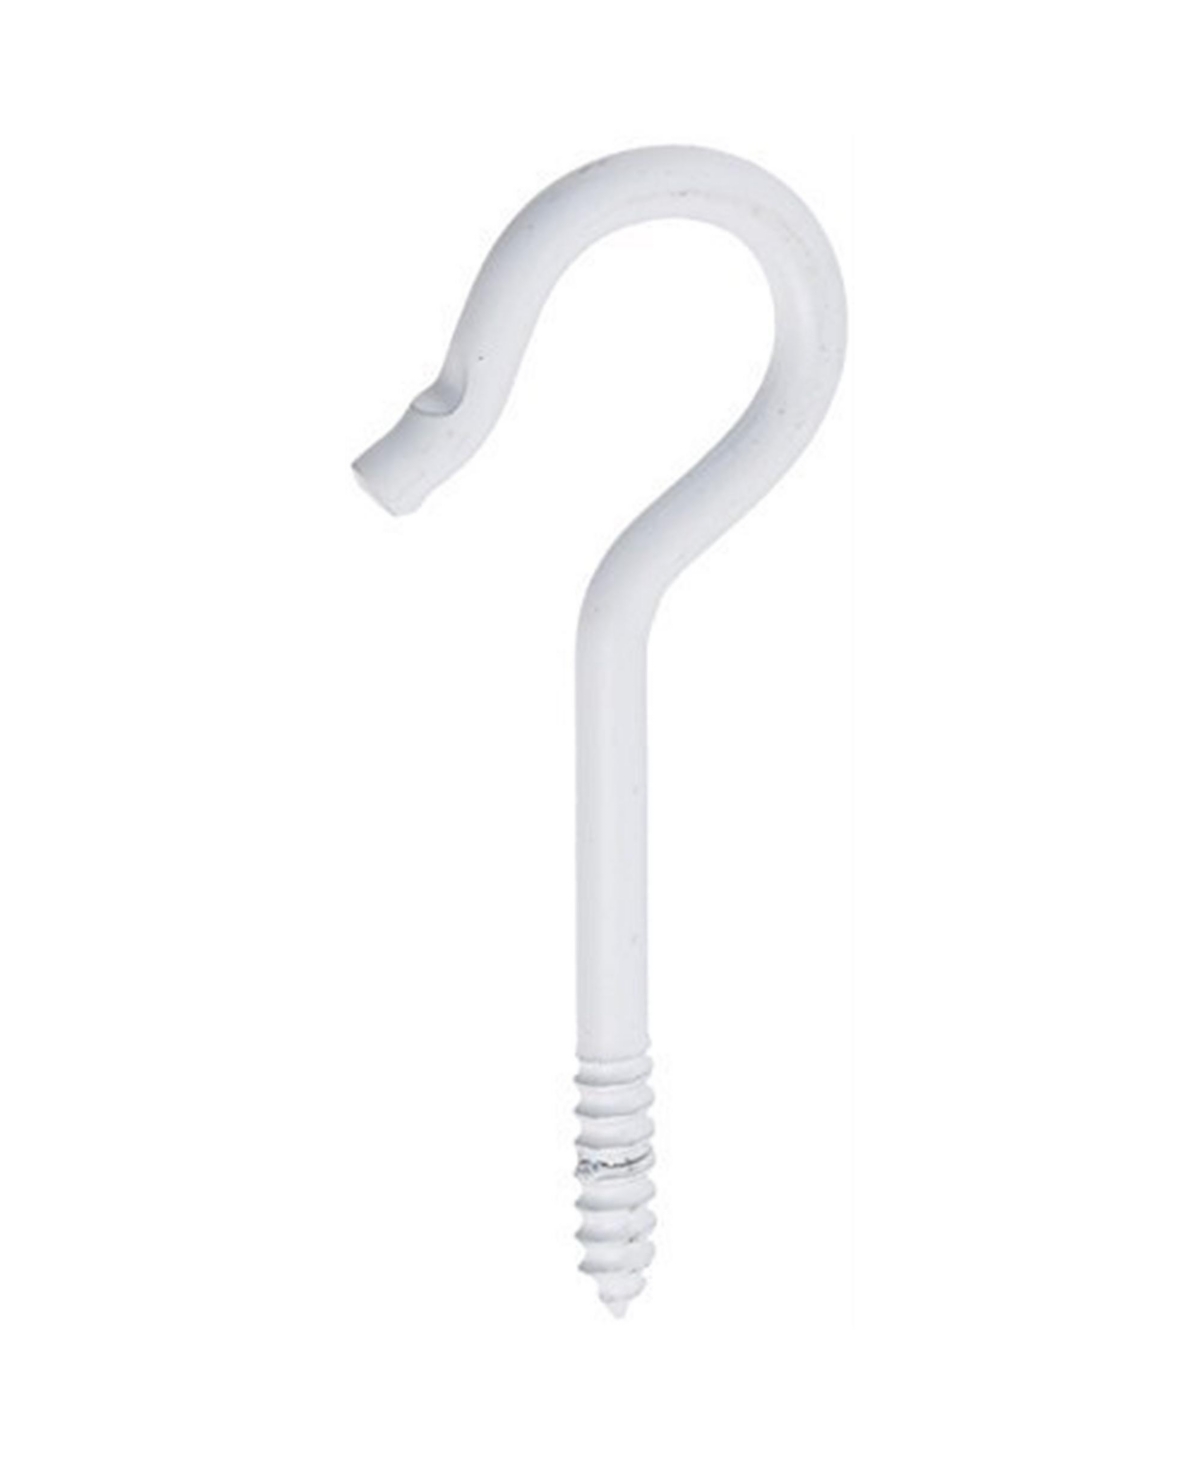 Products Corp White Ceiling Hooks, 5 Pack - White